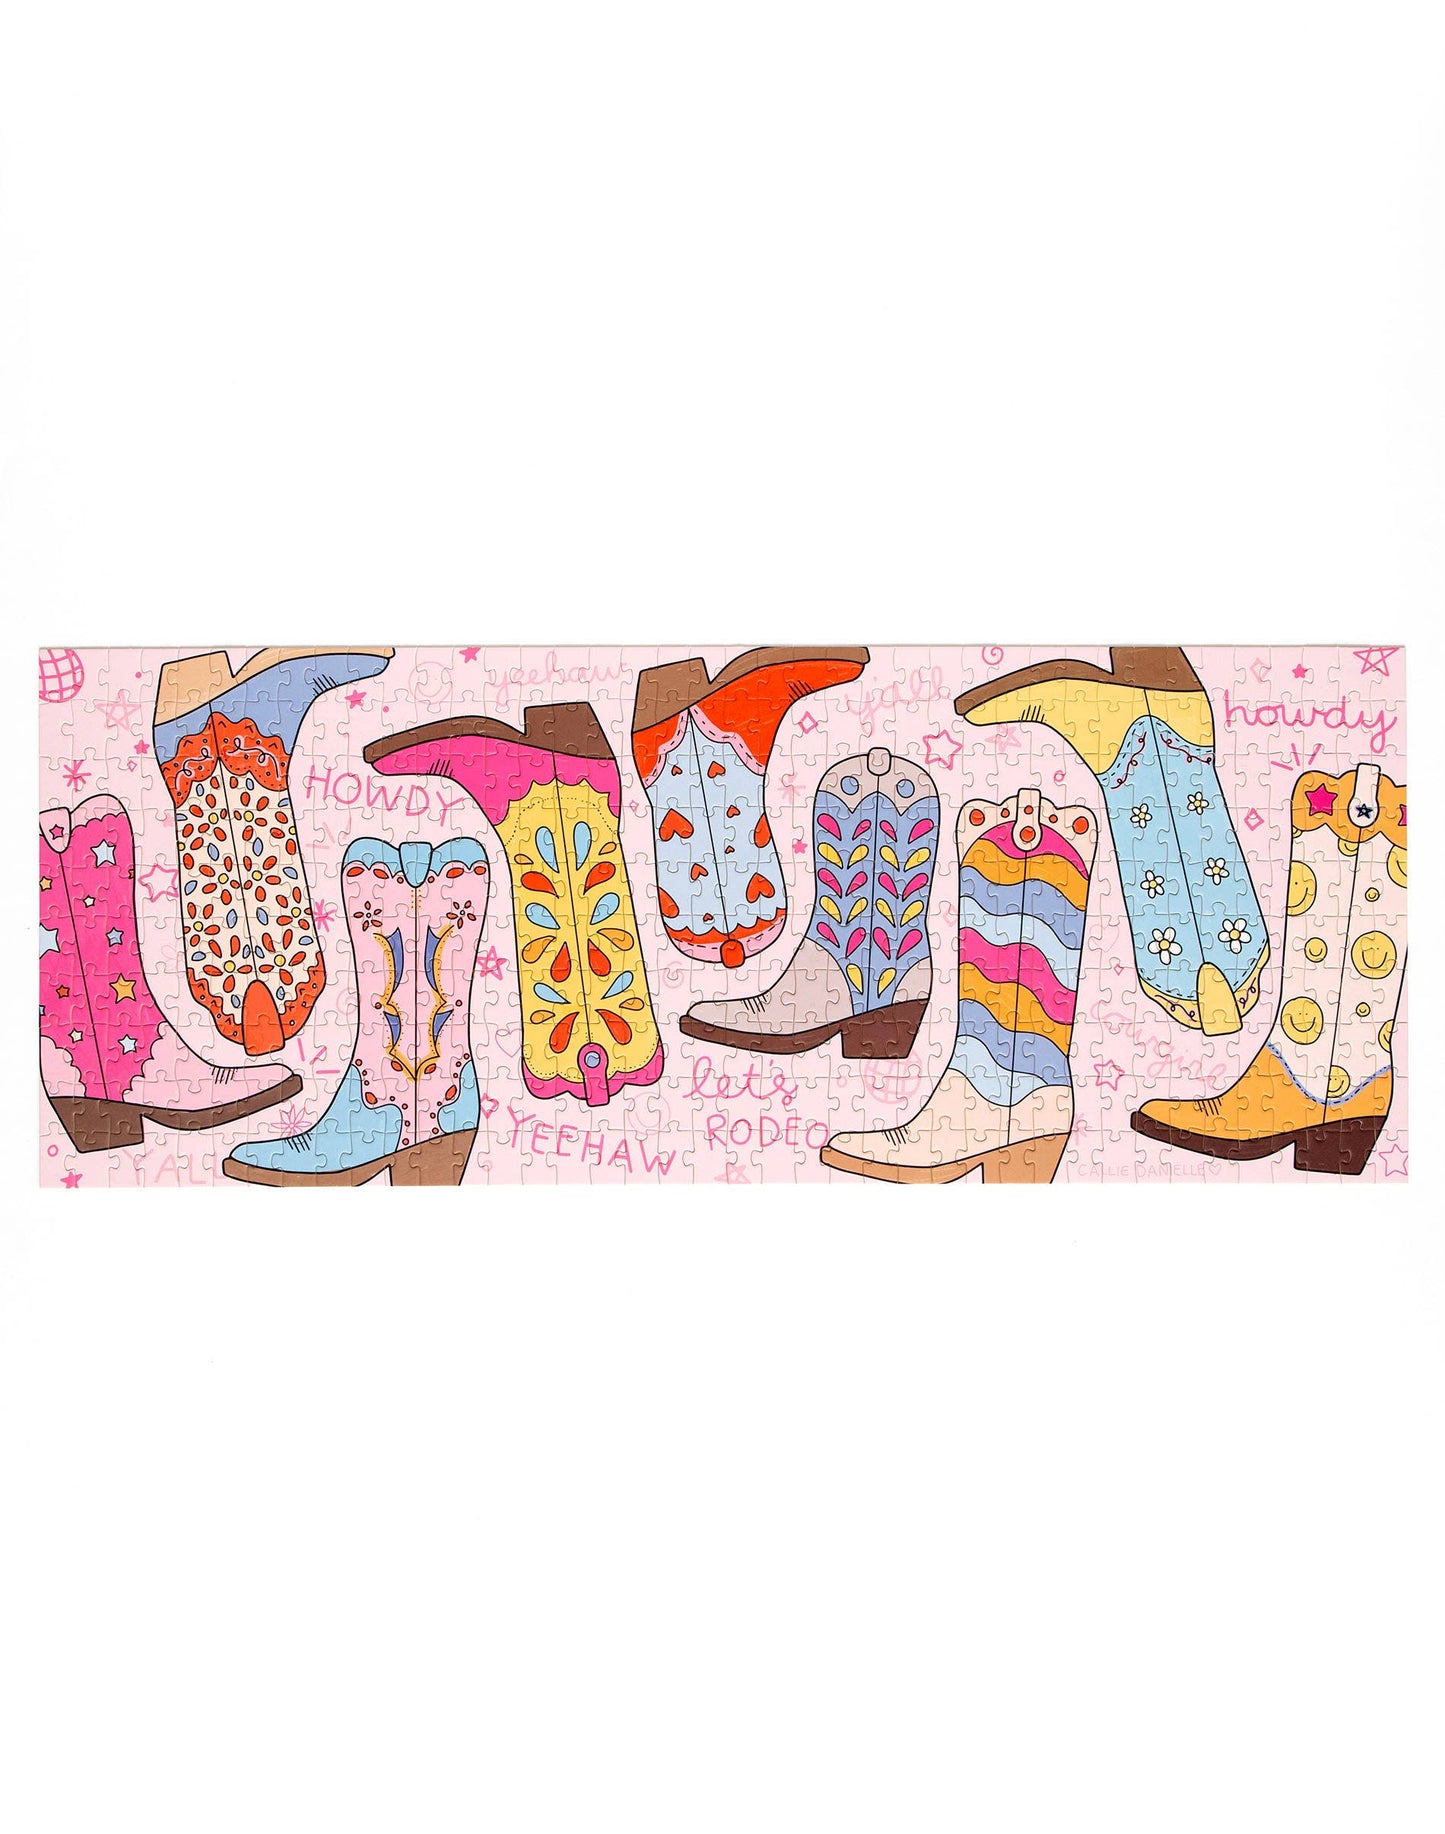 Western Cowgirl Boots - 400 Piece Panoramic Jigsaw Puzzle